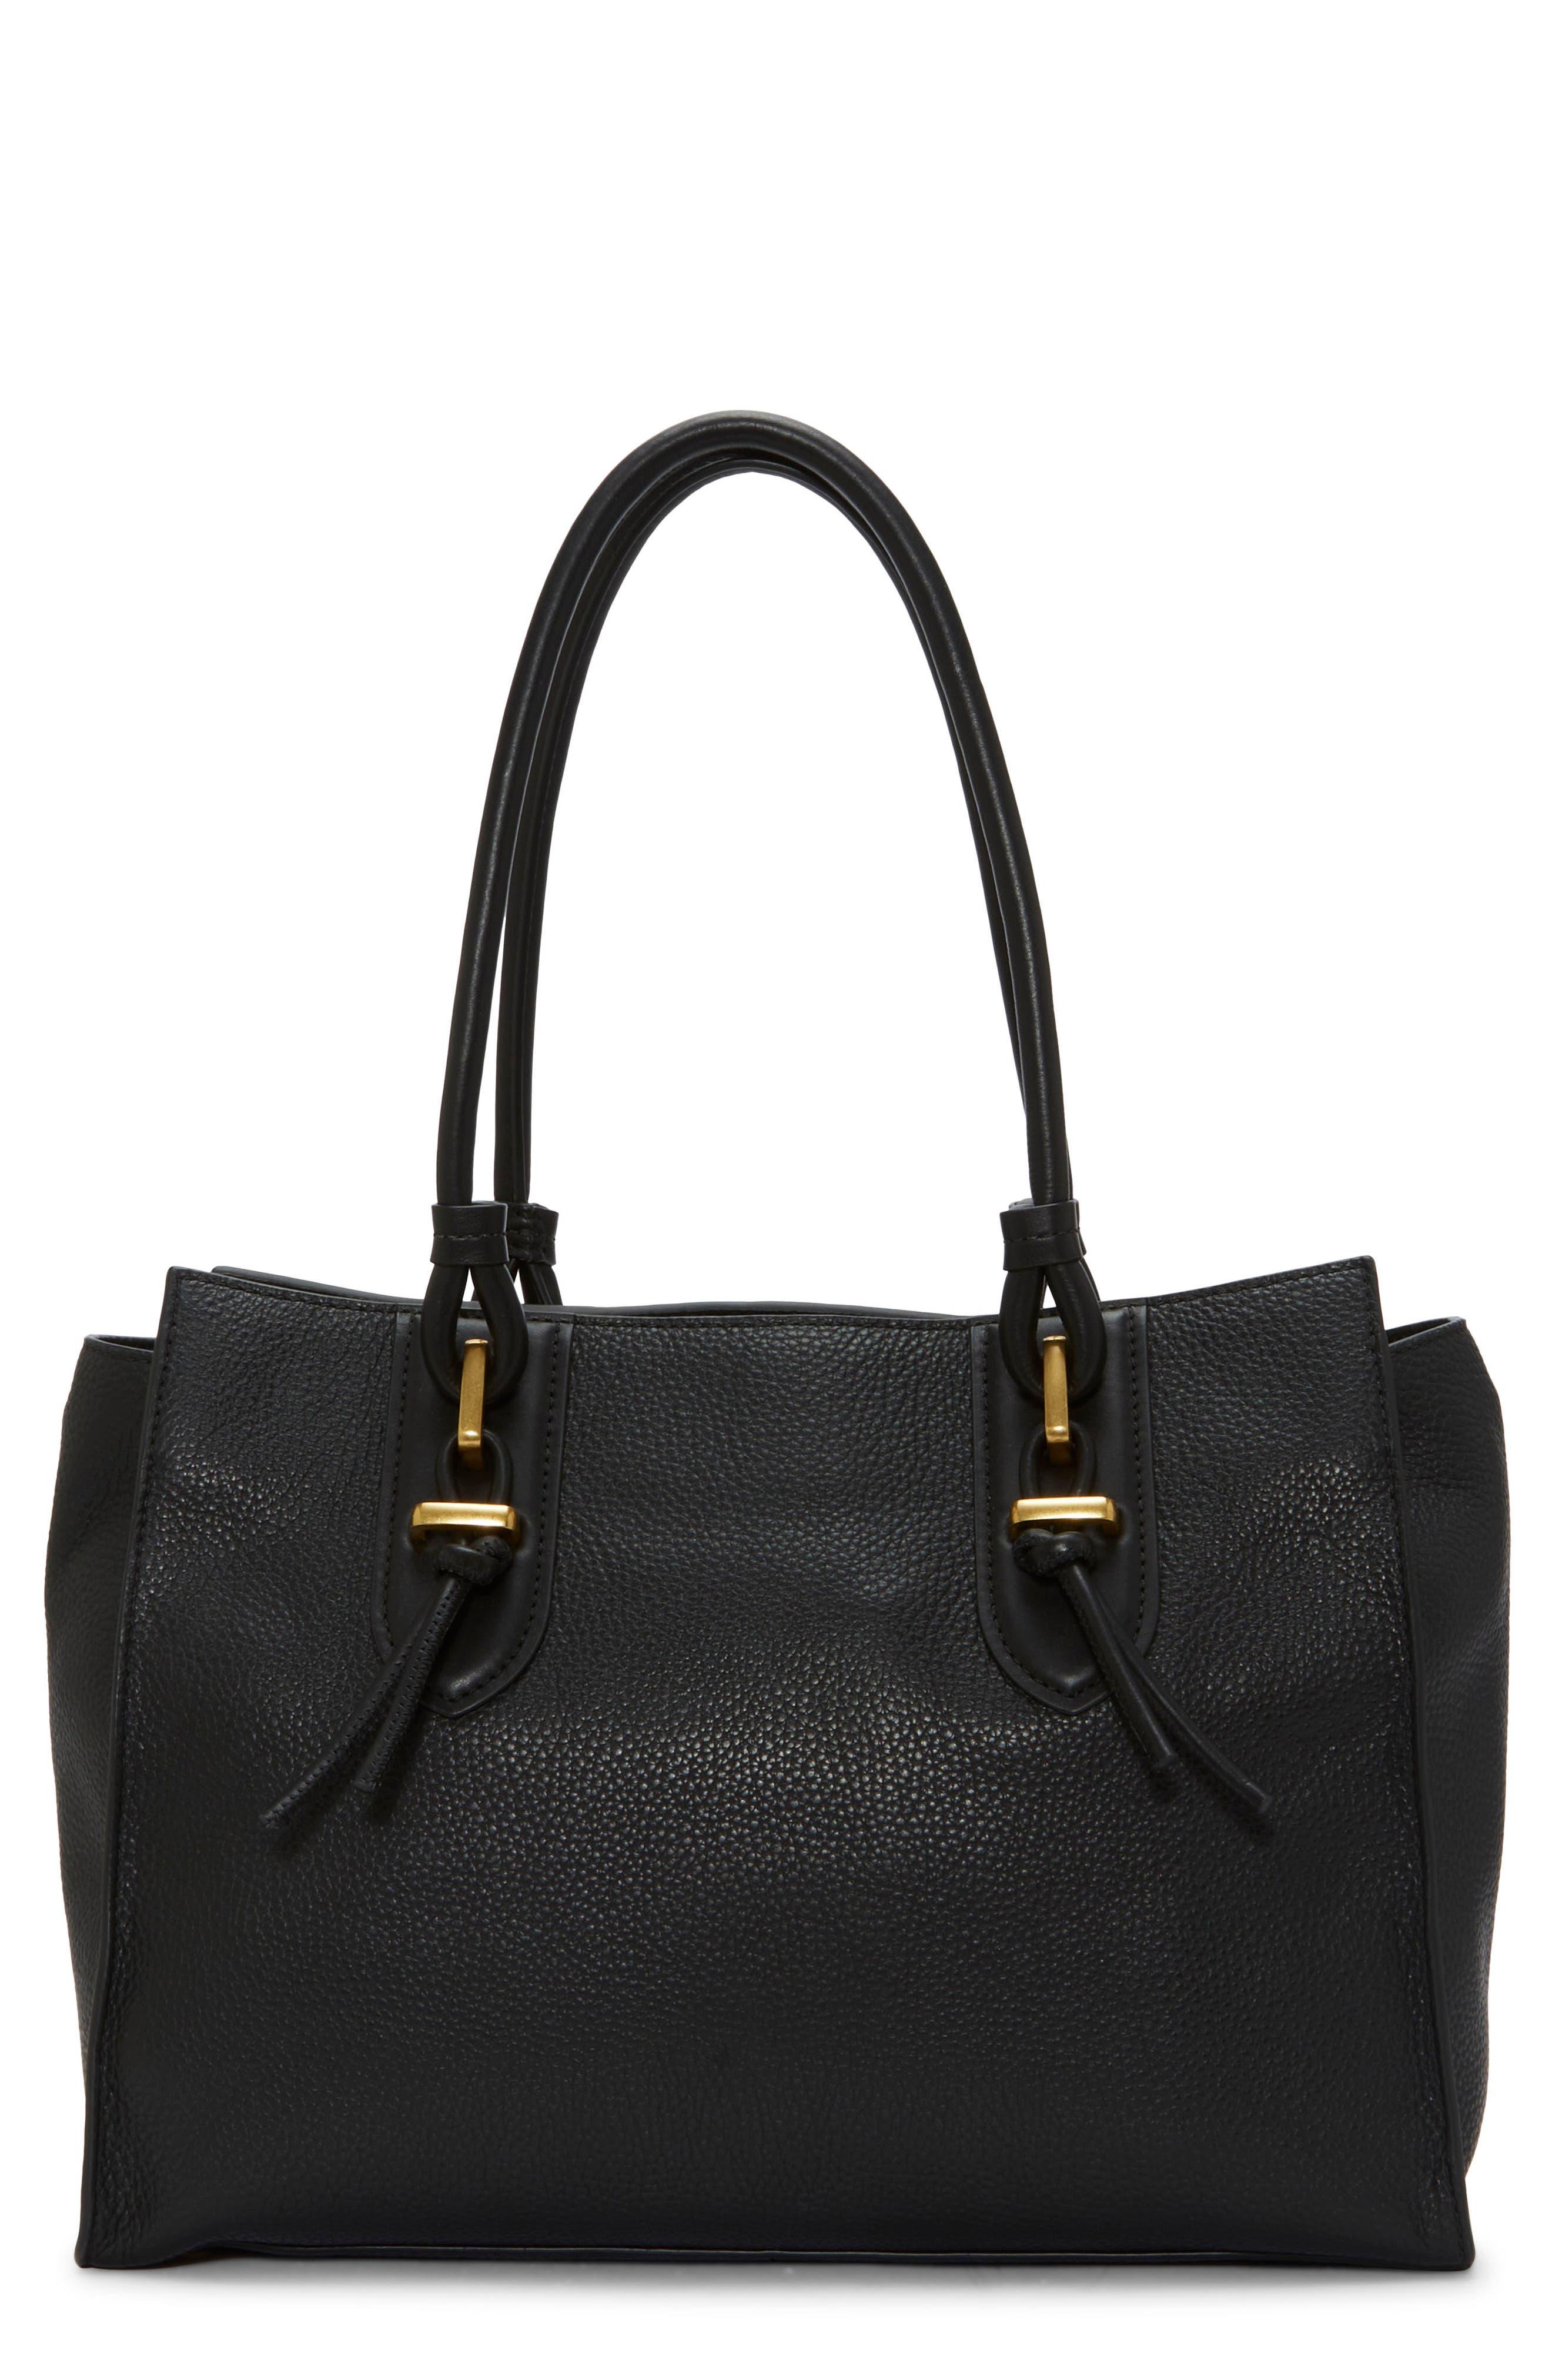 Vince Camuto Maecy Leather Tote in Black | Lyst